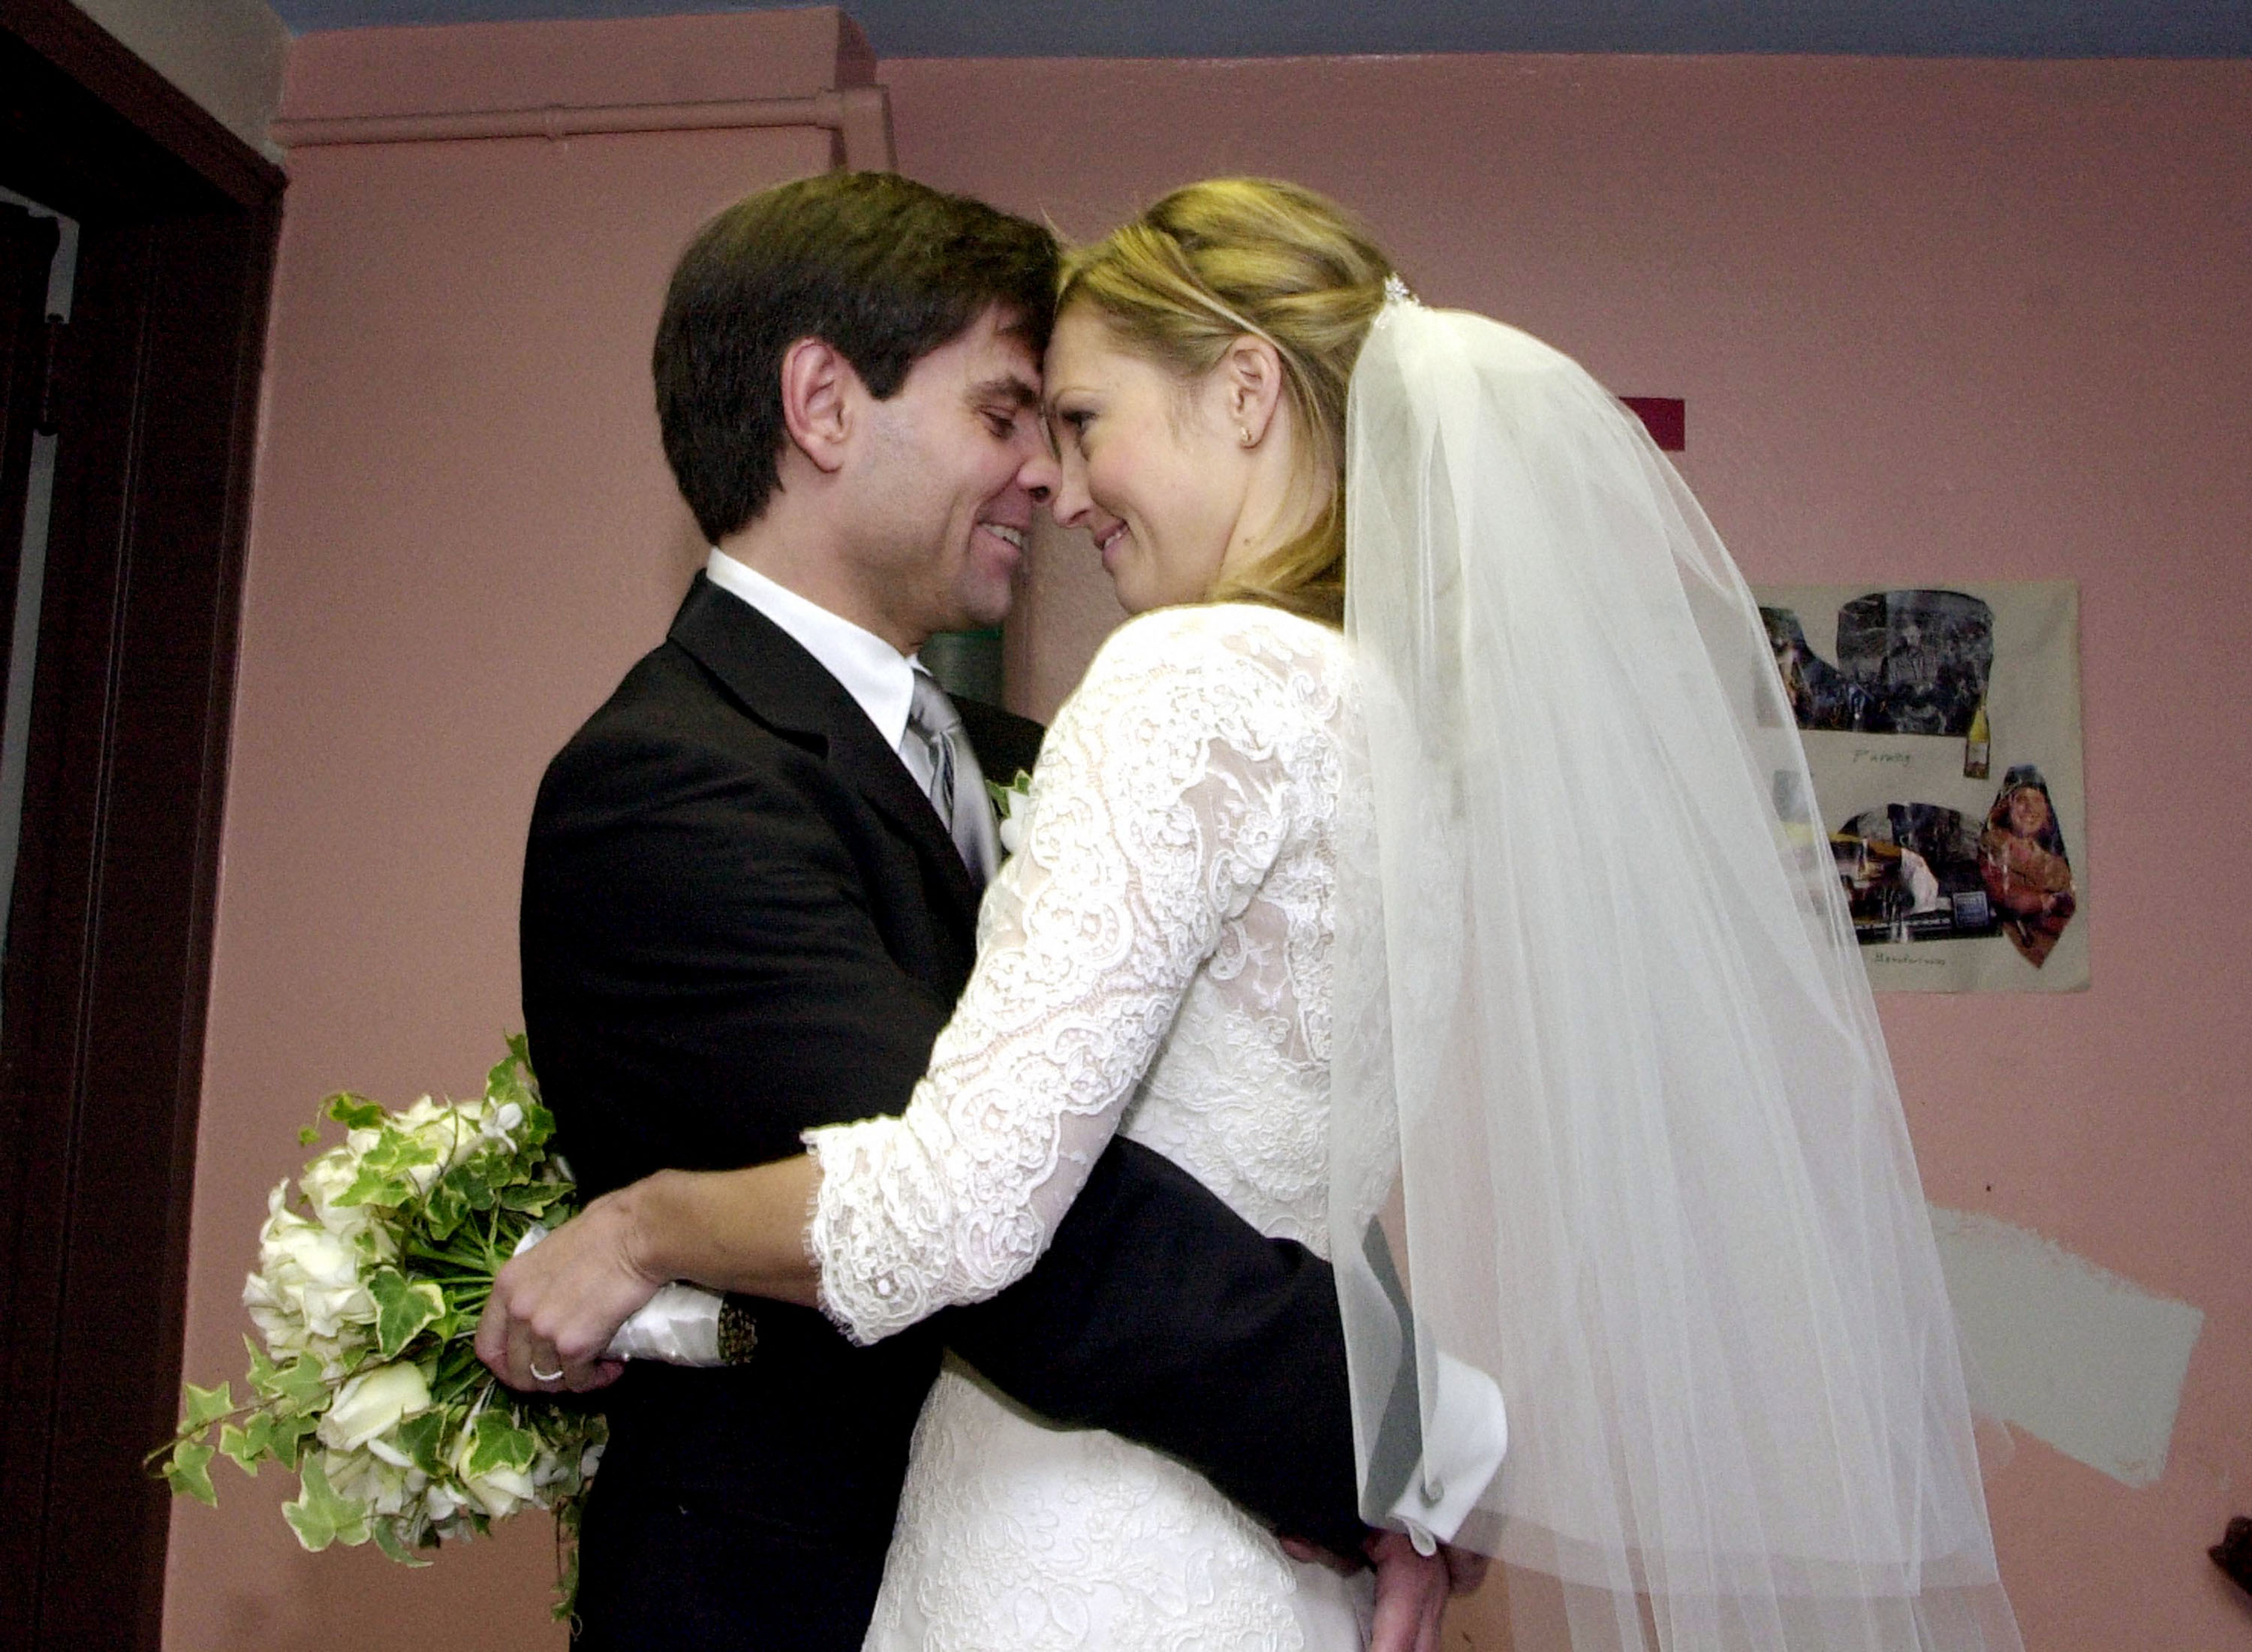 Former presidential advisor George Stephanopoulos looks at his new bride Alexandra Wentworth November 20, 2001 at the Holy Trinity Cathedral Greek Orthodox Church in New York City. | Source: Getty Images